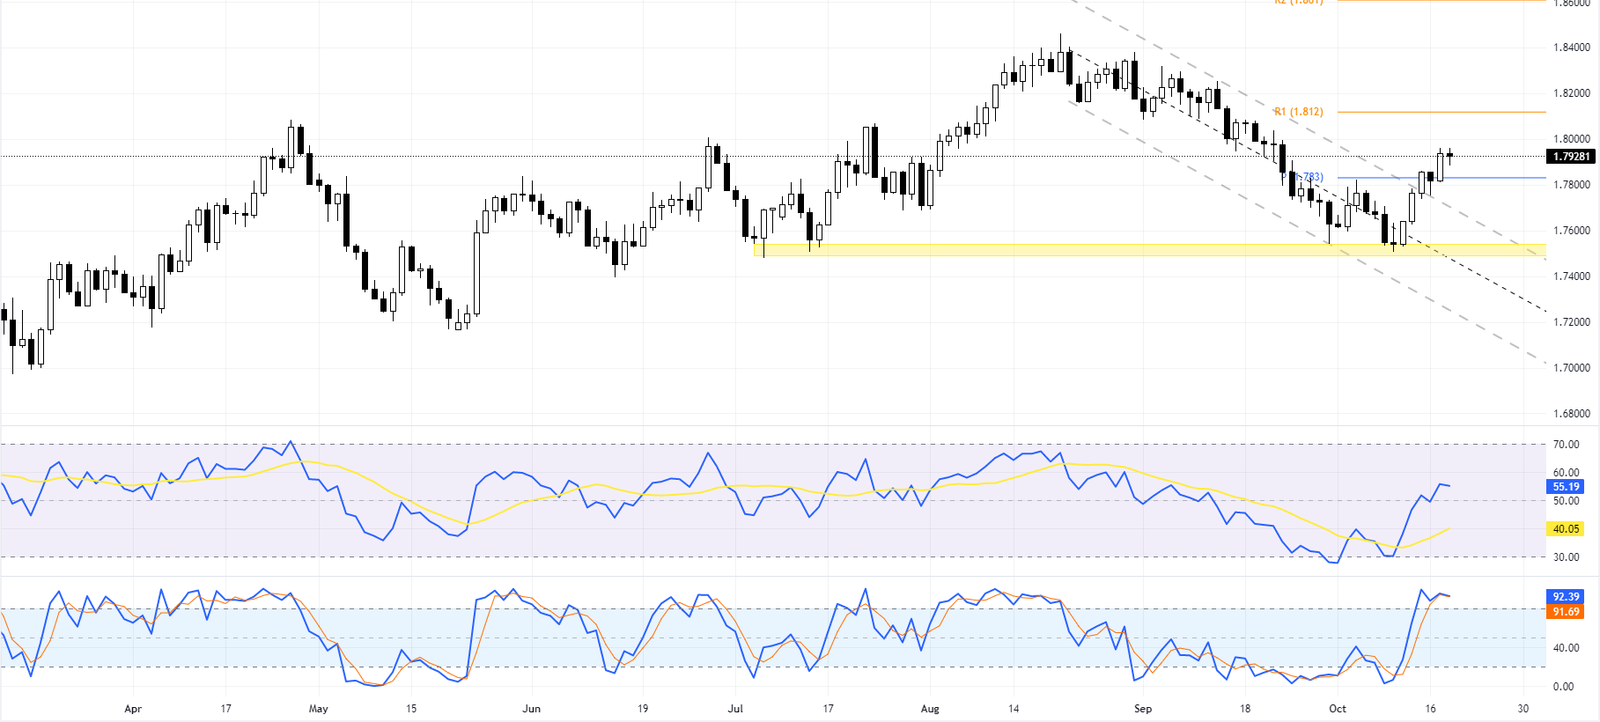 EURNZD Forecast - NZX50 and Bullish Trend Factors